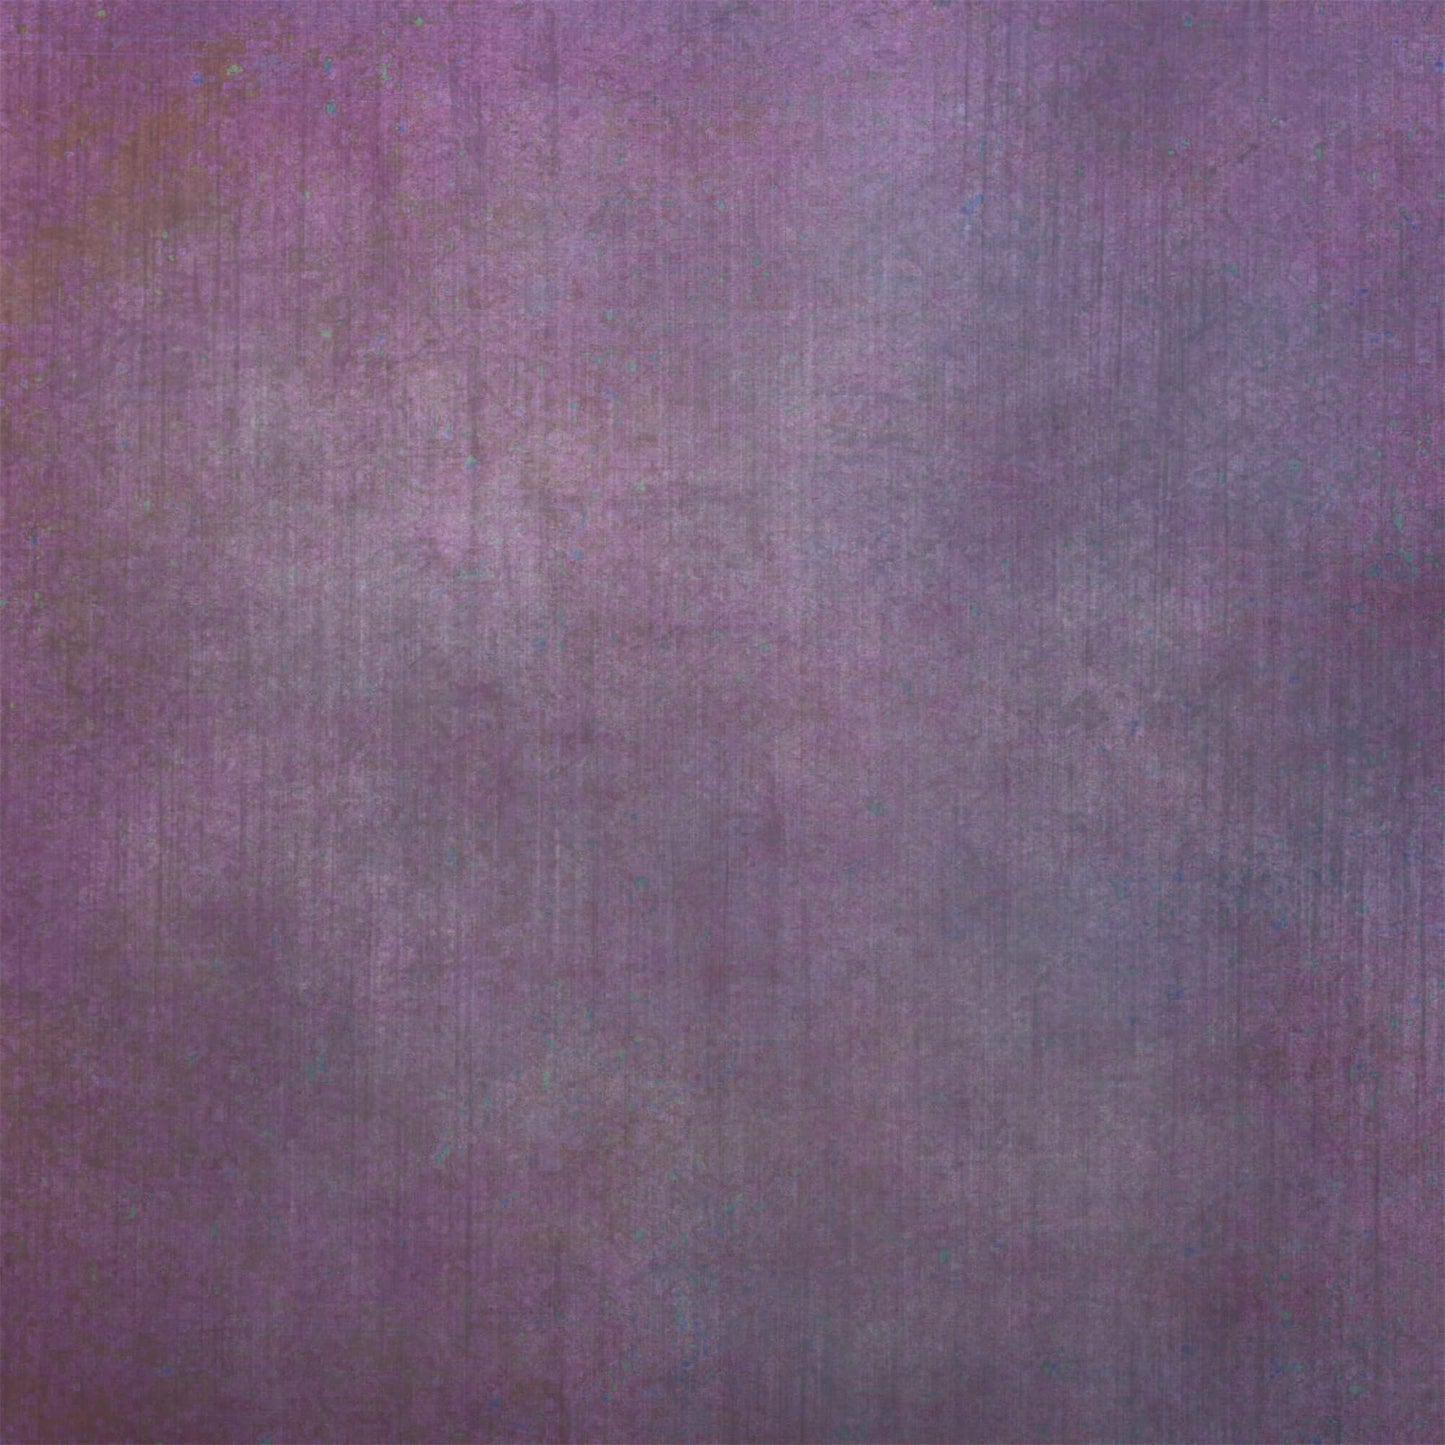 Abstract Berry Purple Backdrop for Studio Photography M2-02